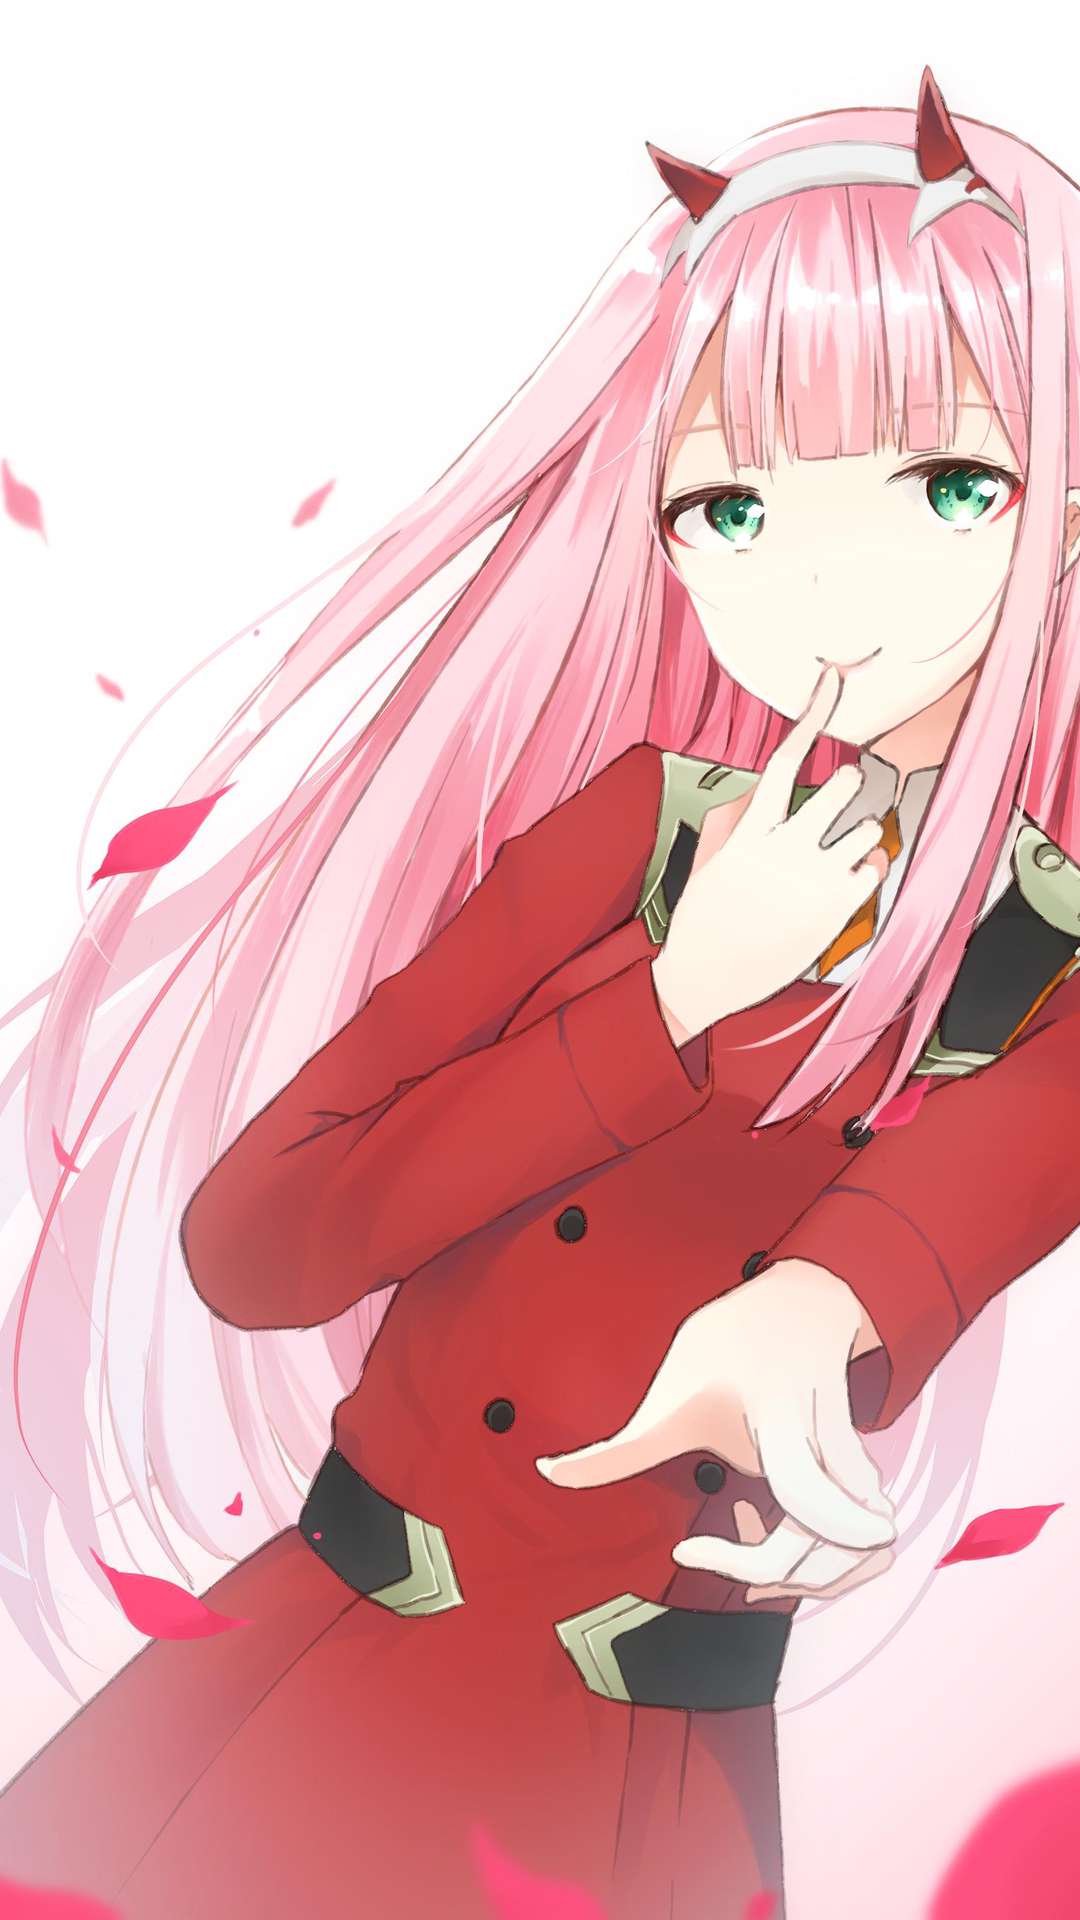 Darling in the Franxx  ZERO TWO  Live Wallpaper  Android setup   Customize your Homescreen  EP59  YouTube